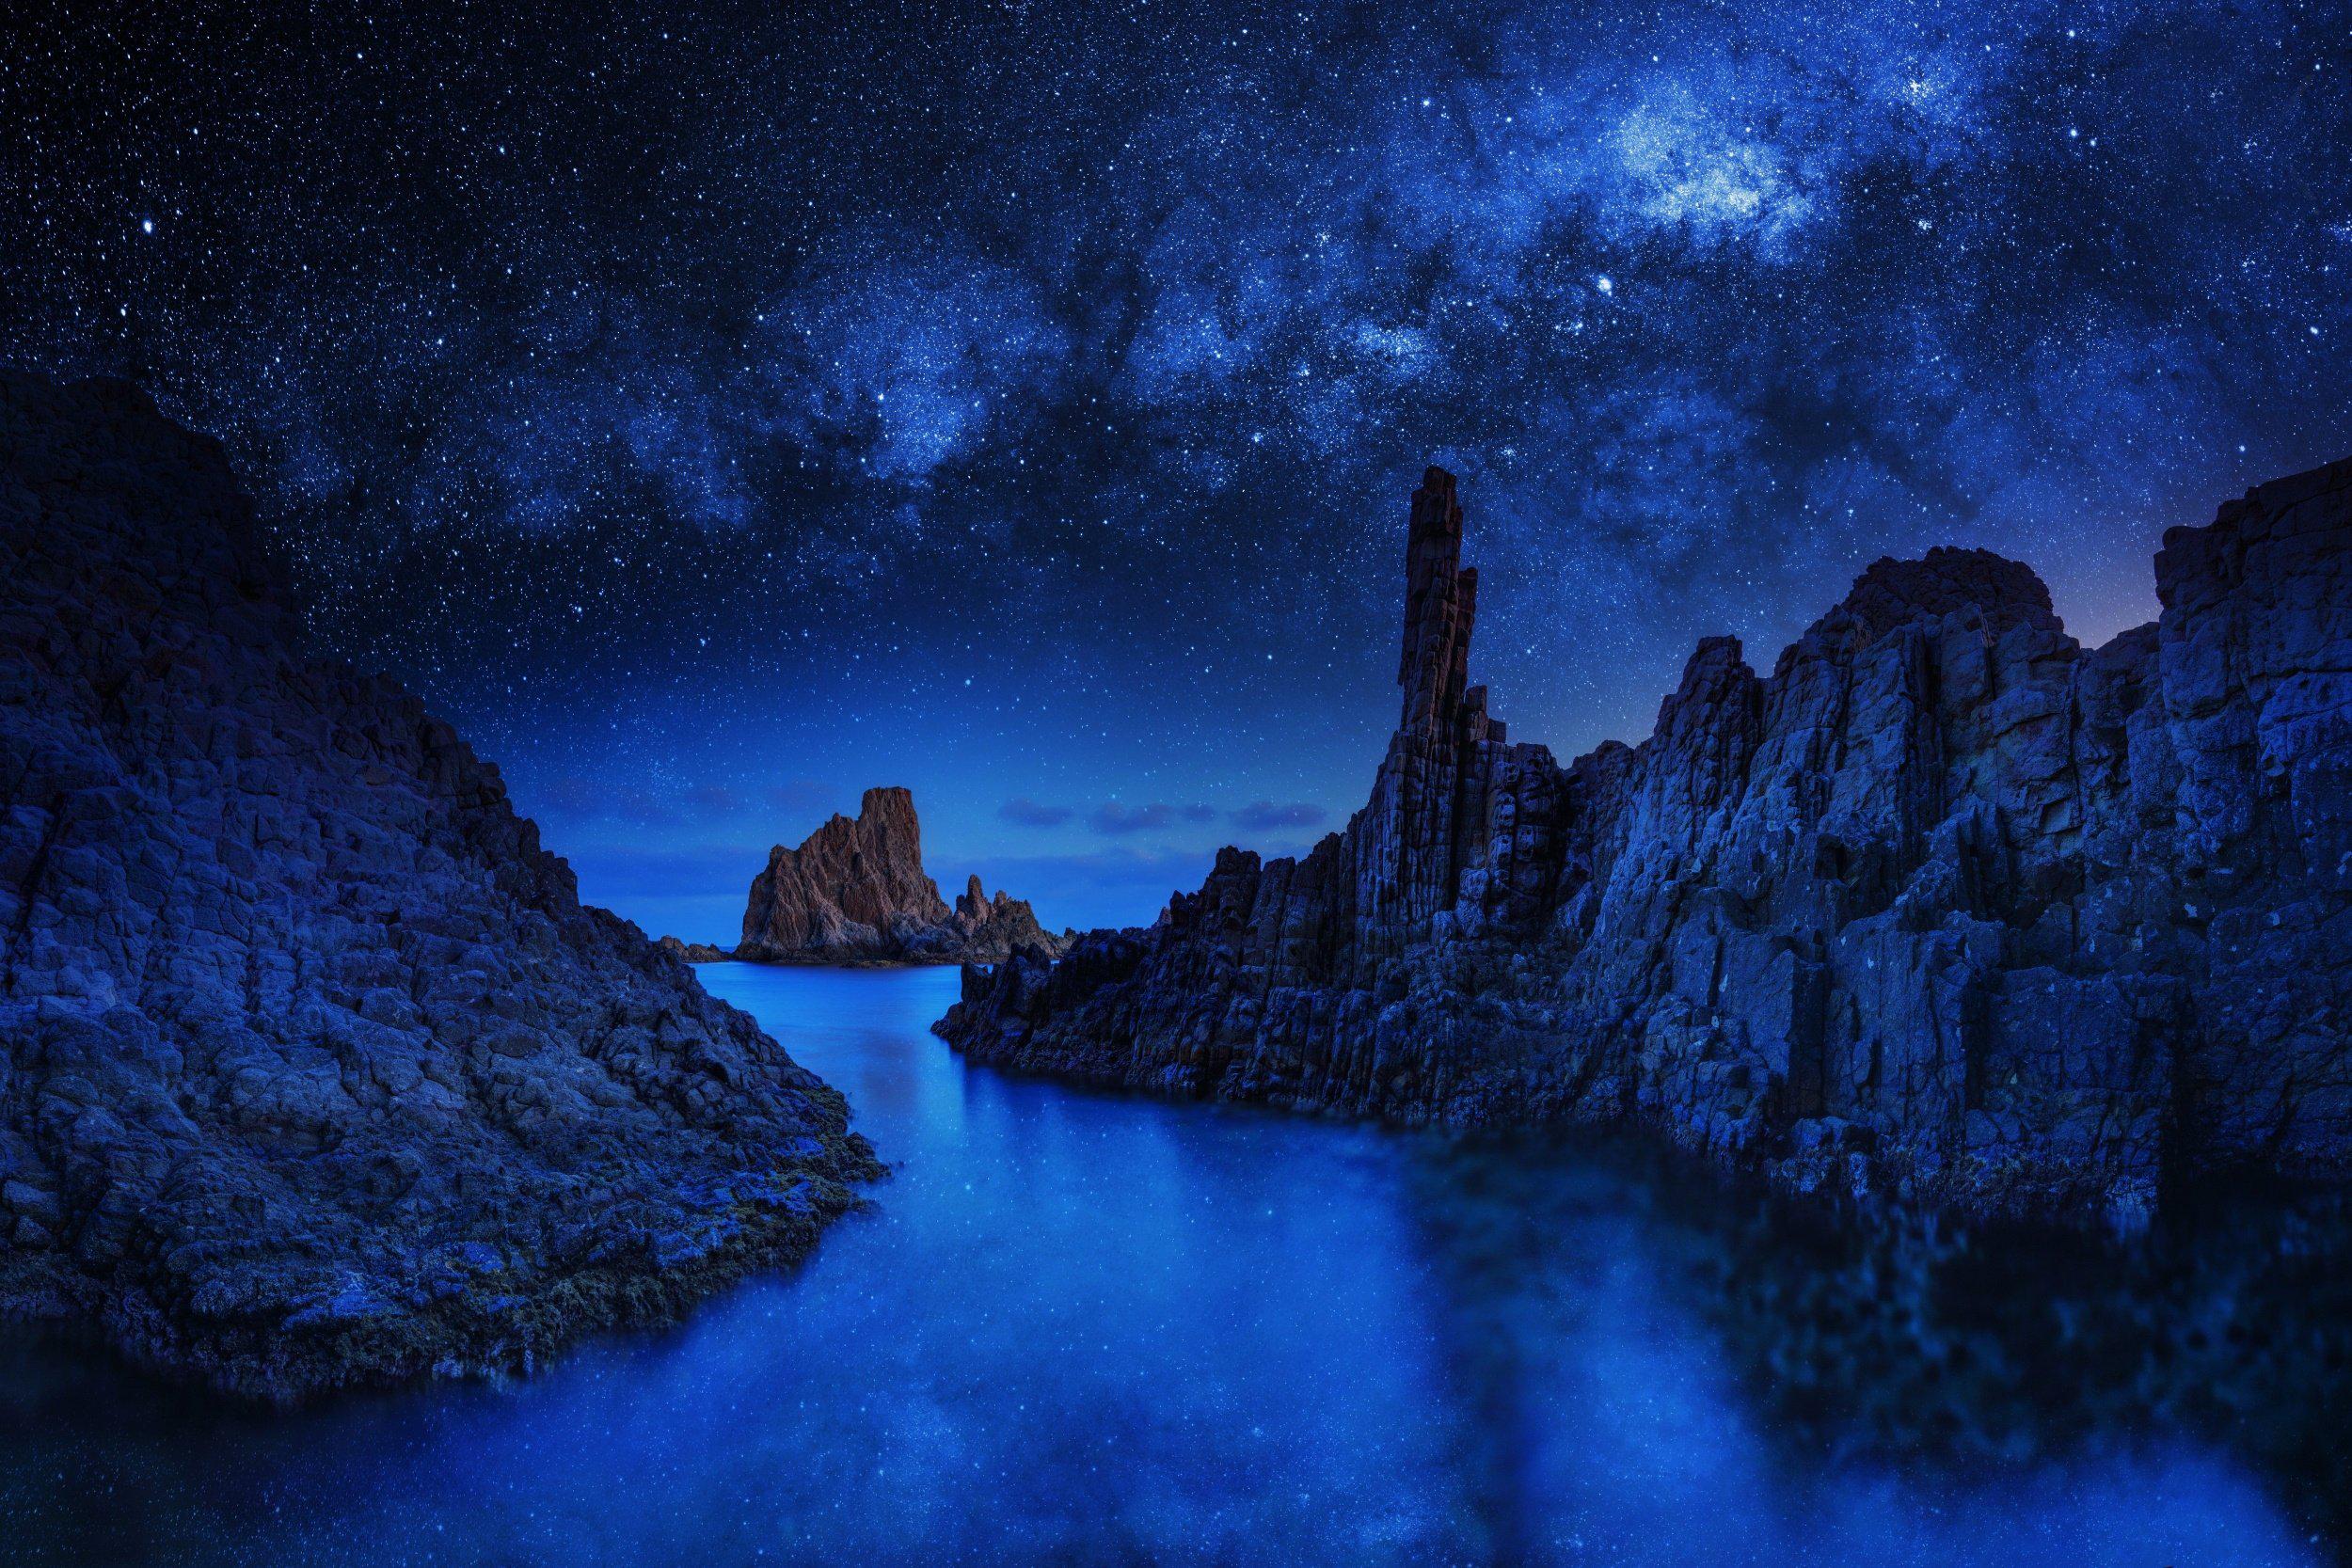 night blue rivers with night clouds hd image picture download